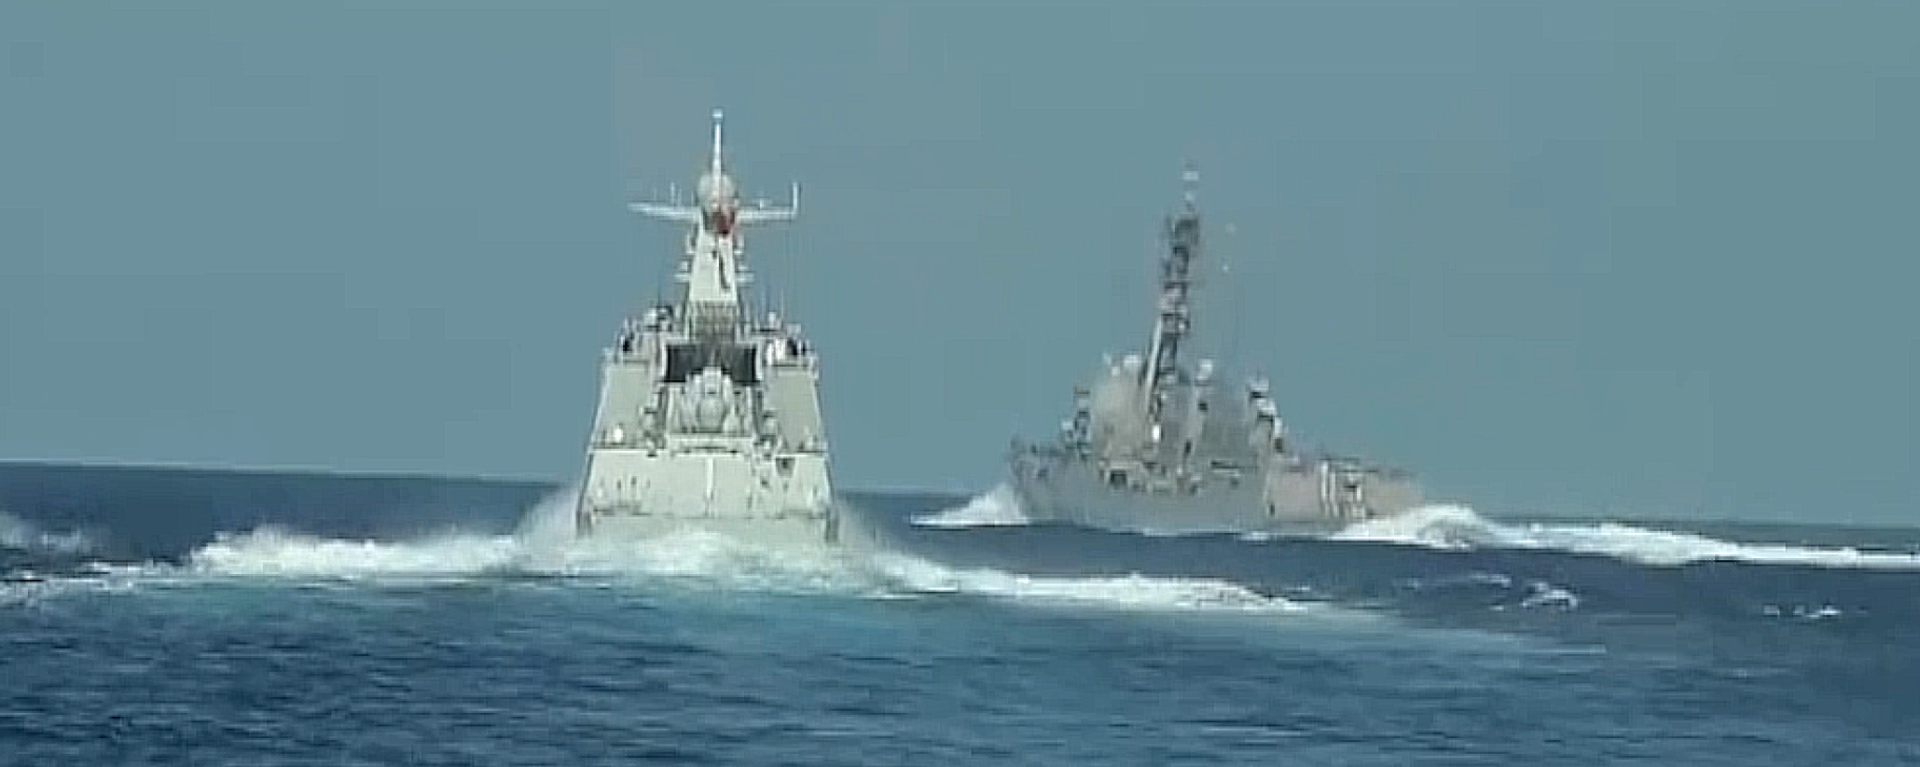 The American destroyer USS Ralph Johnson (right) is seen cutting across the bow of the Chinese frigate Guilin (left) in an encounter on August 19 in the South China Sea. The Chinese Ministry of National Defense released footage of the incident on October 26, calling it an unfettered provocation that violated several regulations governing safe encounters between ships at sea. - Sputnik International, 1920, 26.04.2024